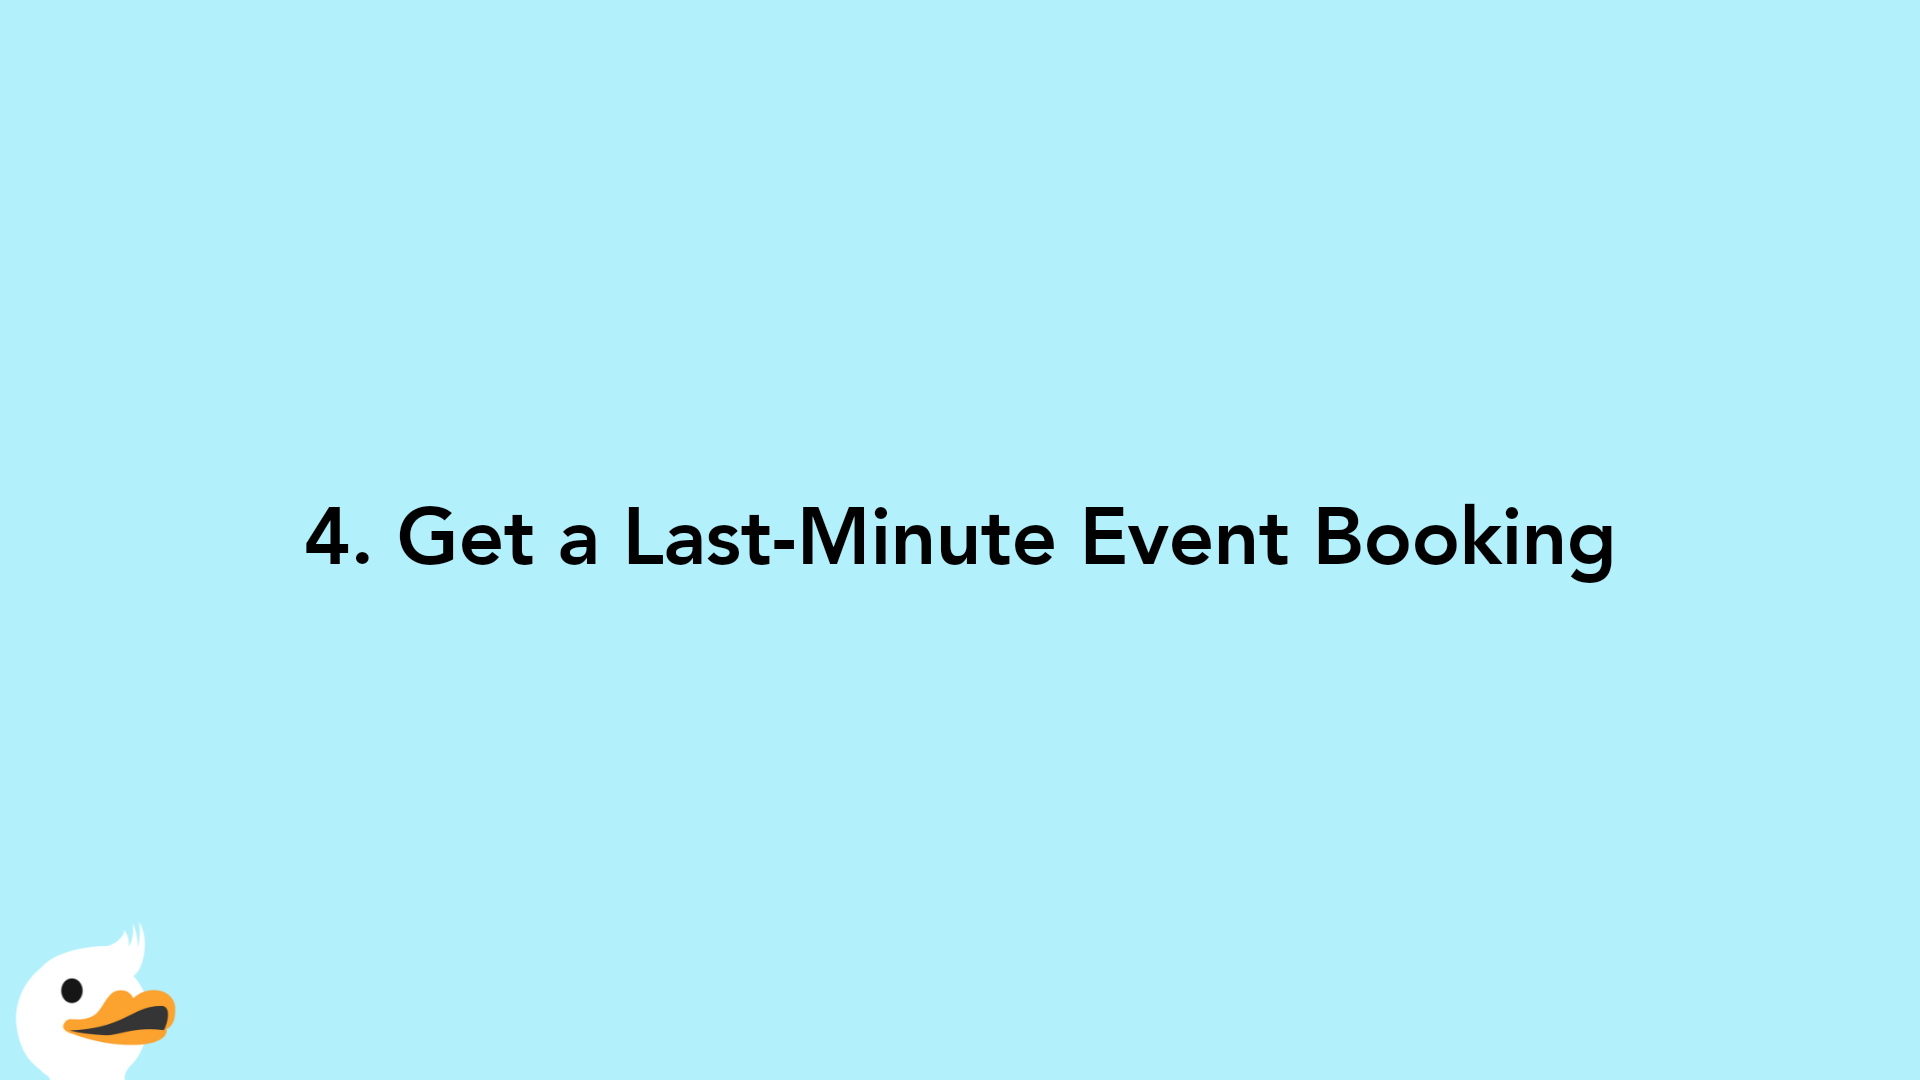 4. Get a Last-Minute Event Booking